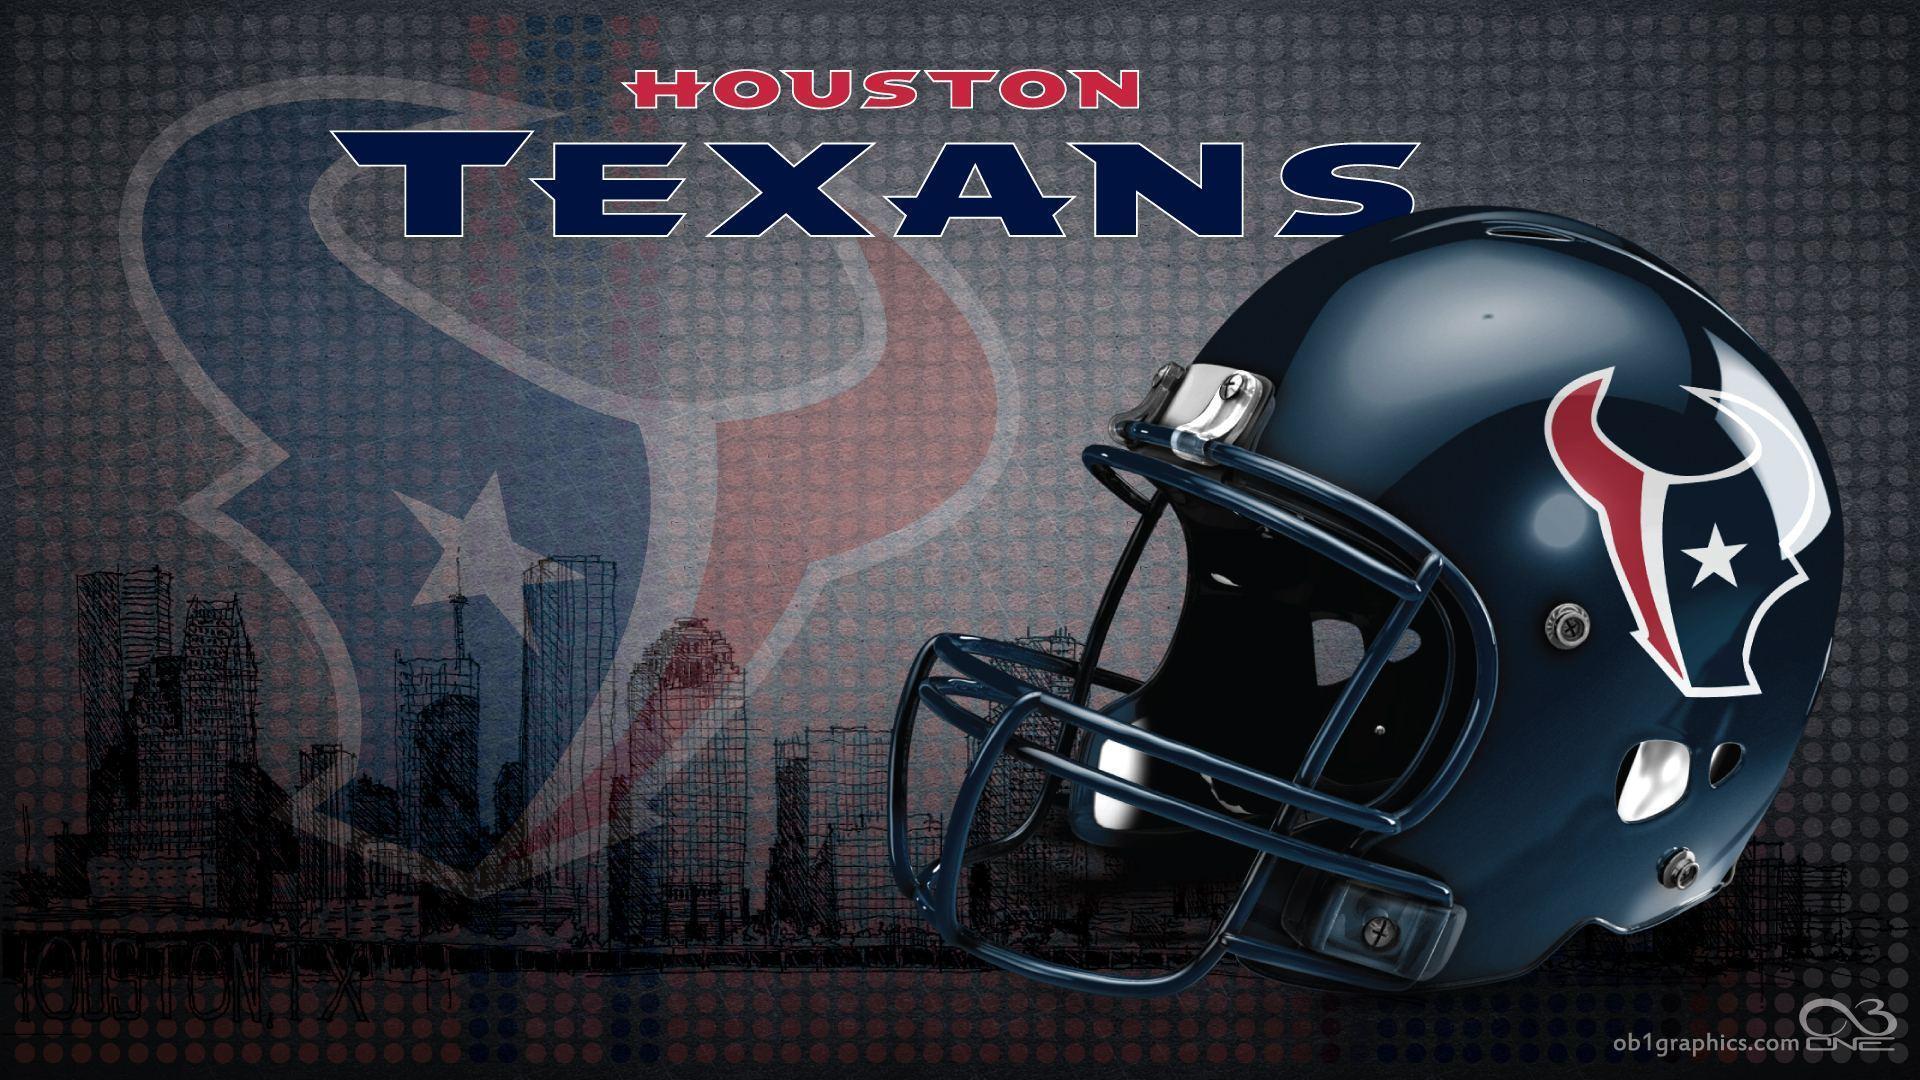 Houston Texans wallpapers hd free download